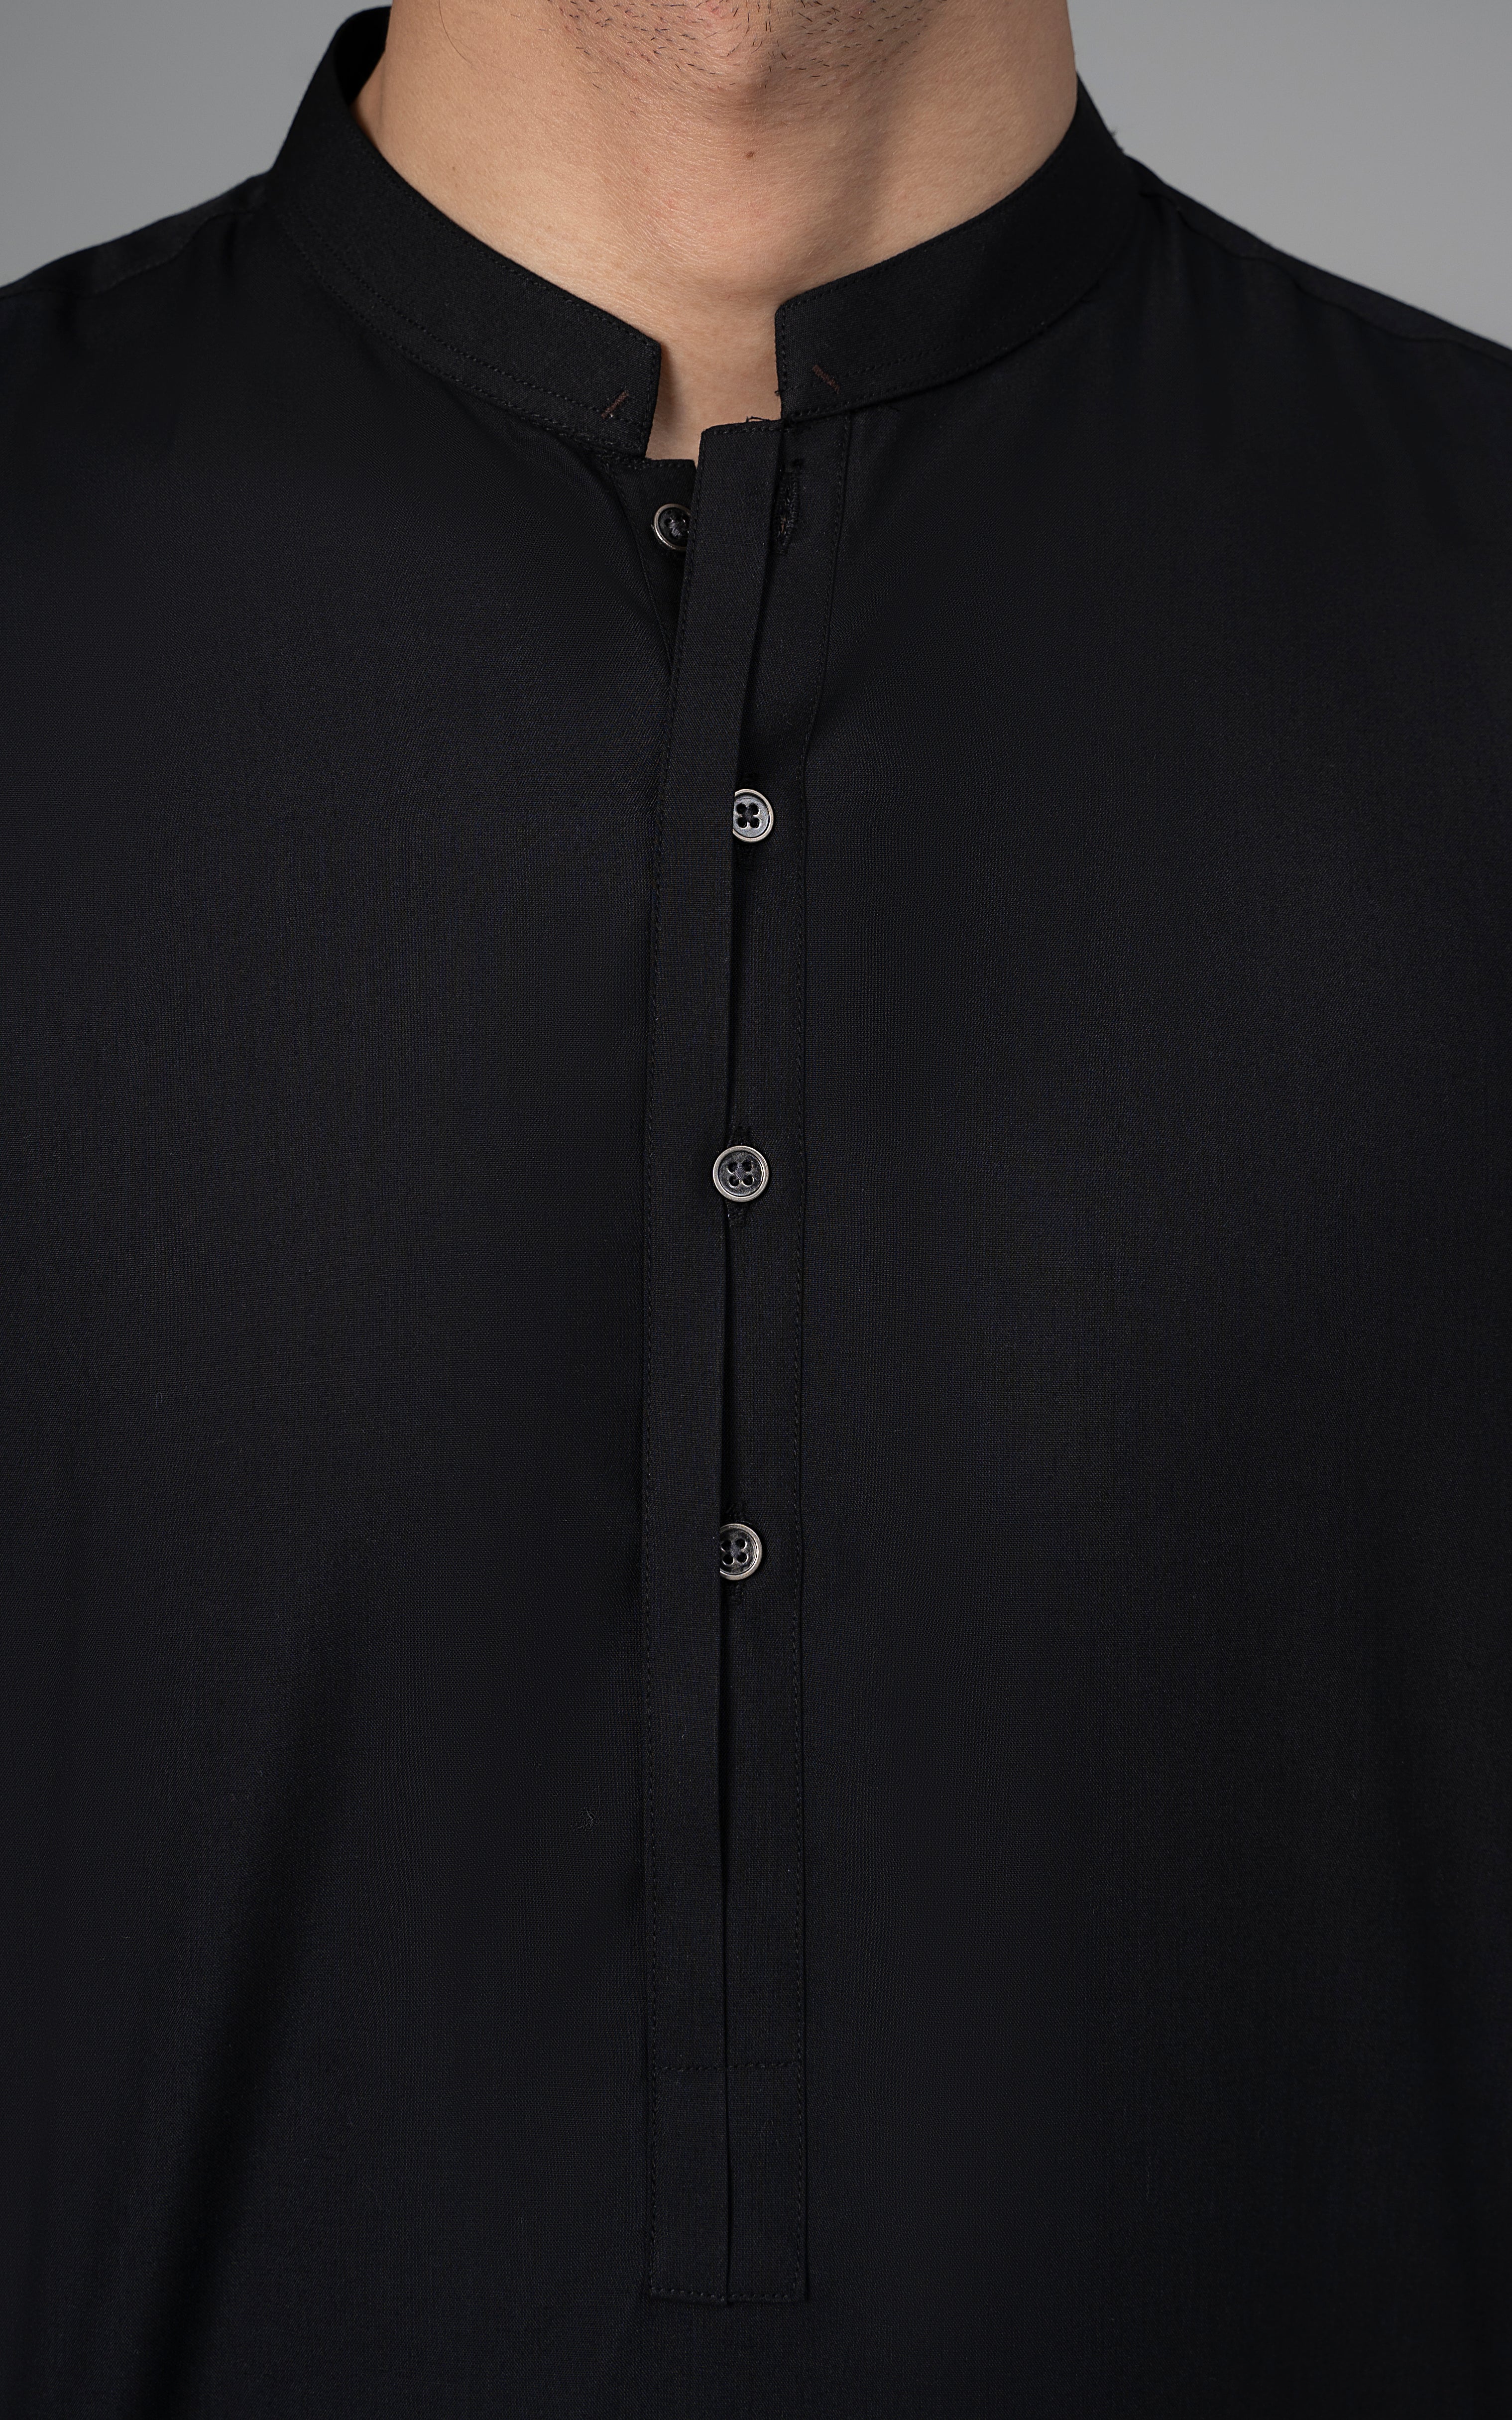 COTTON BLENDED - CLASSIC COLLECTION BLACK